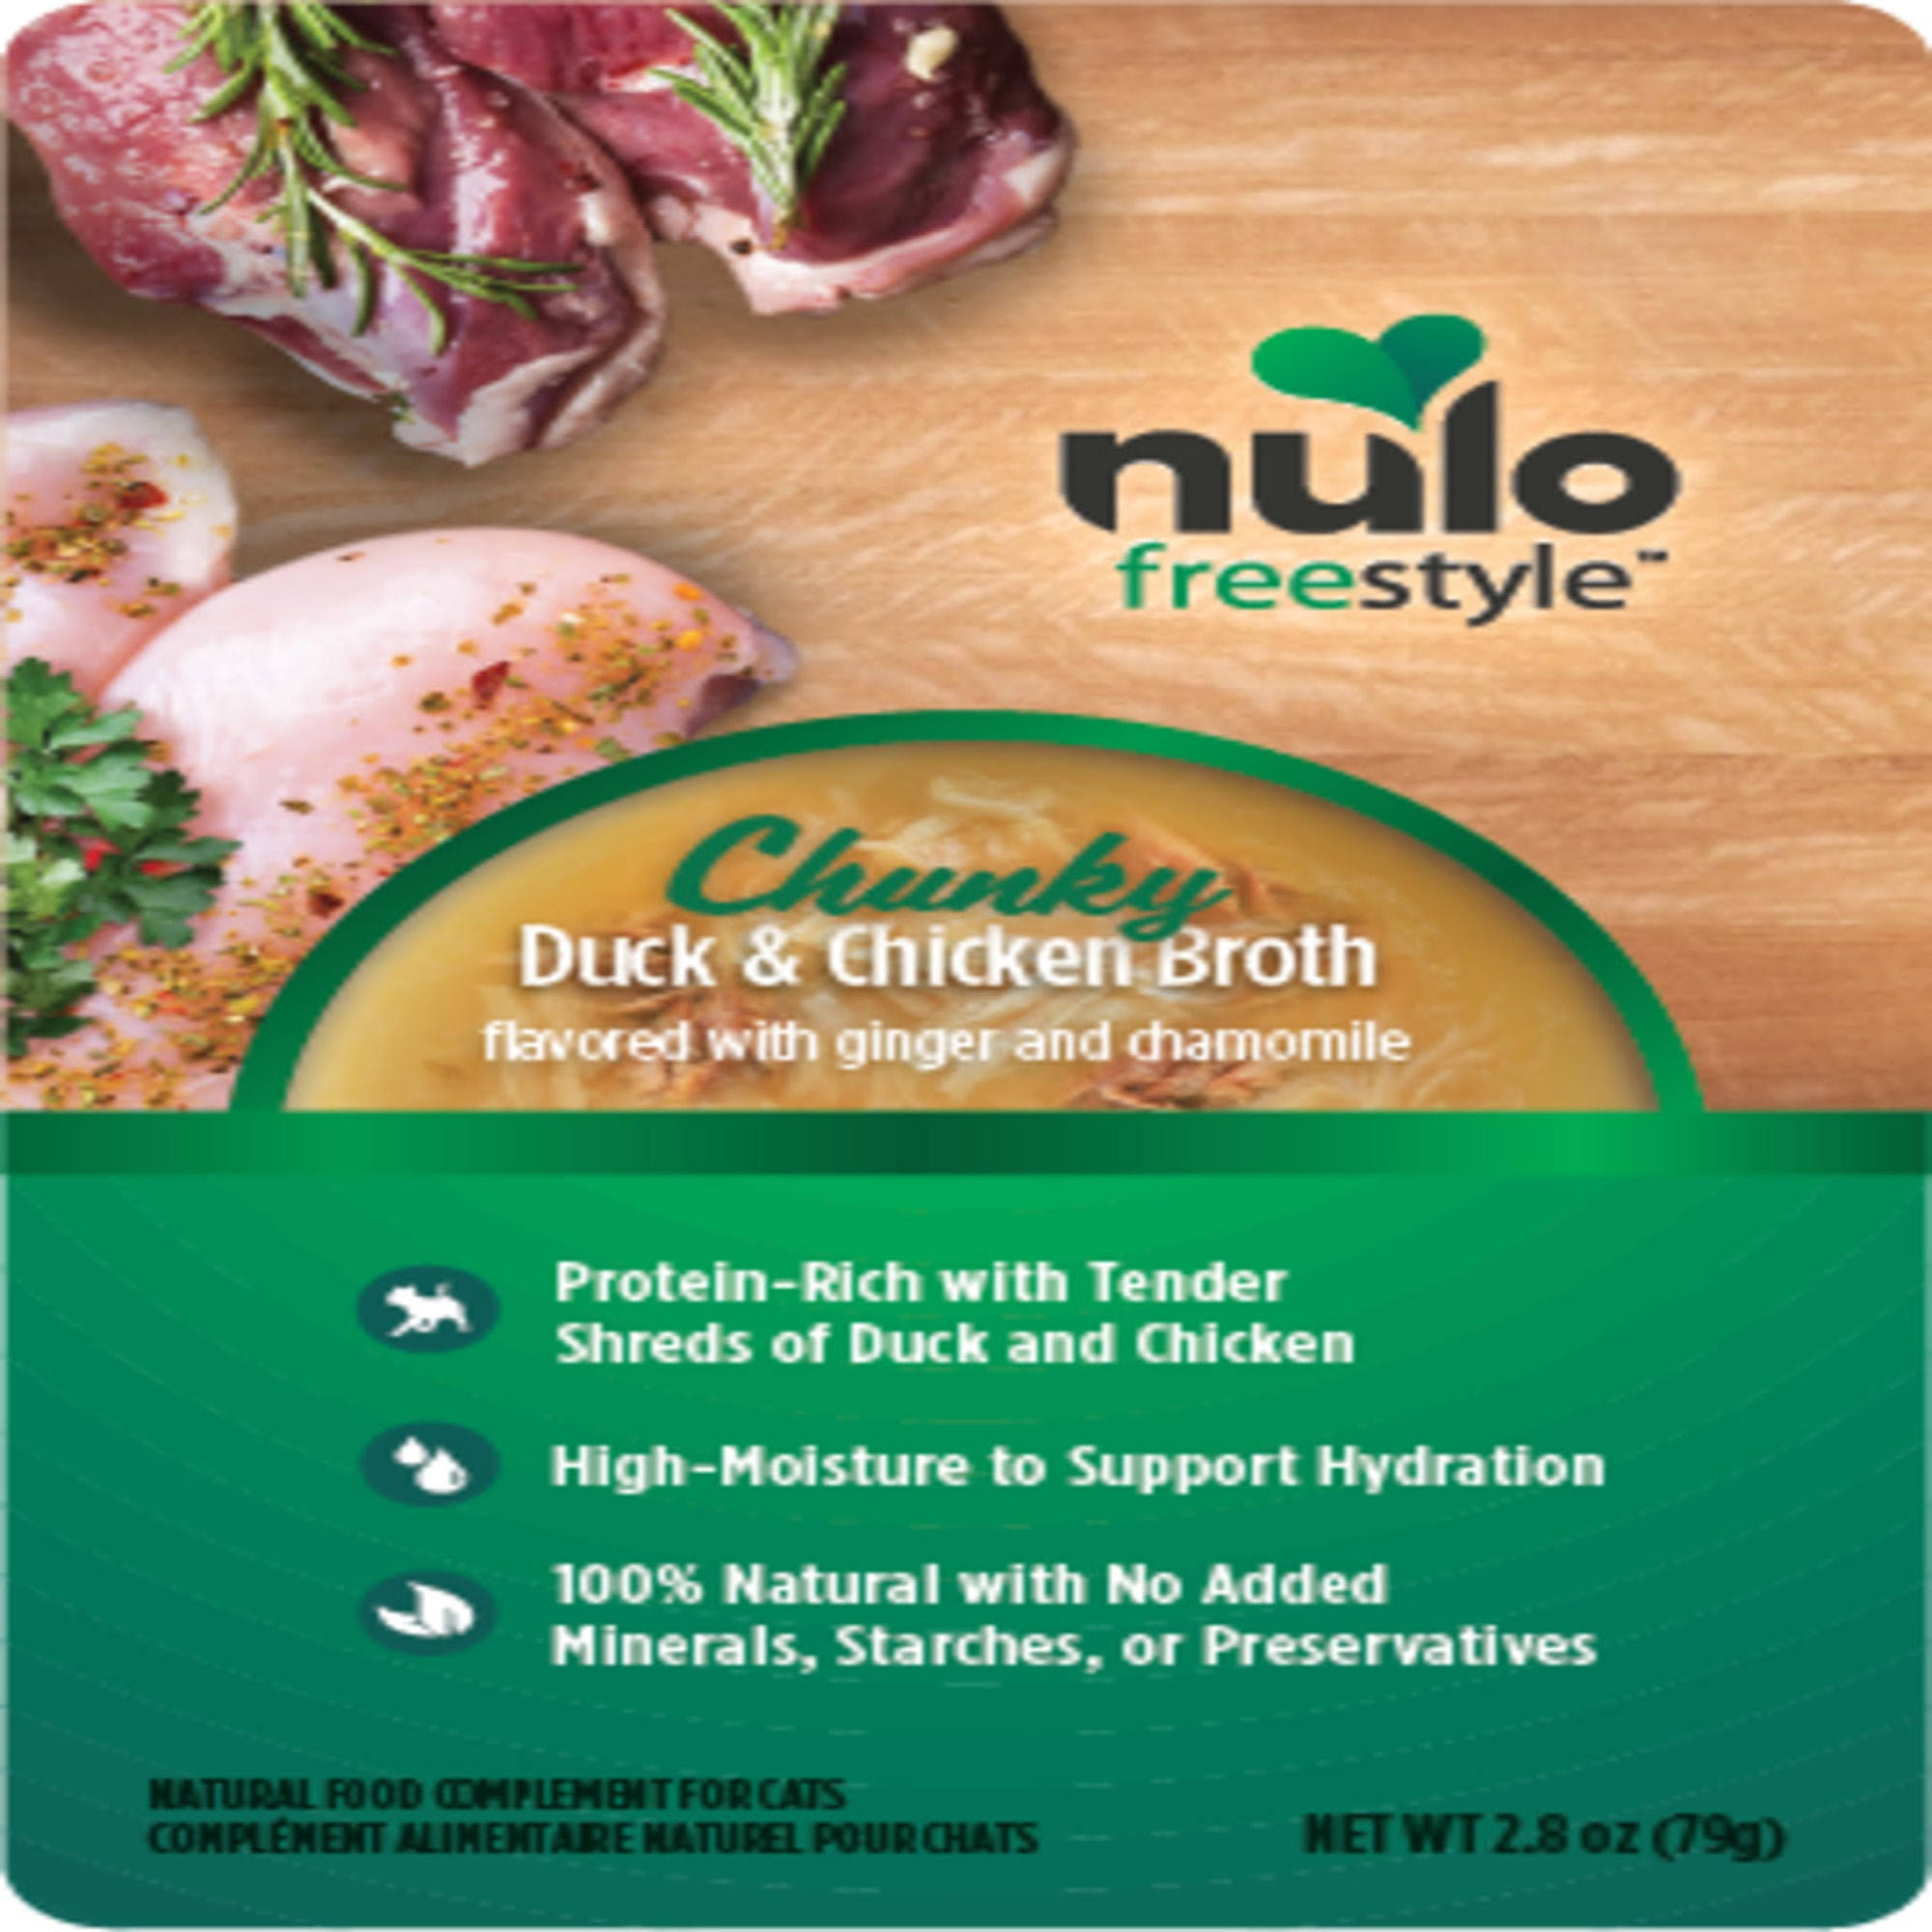 Nulo Freestyle Chunky Duck & Chicken 2.8oz